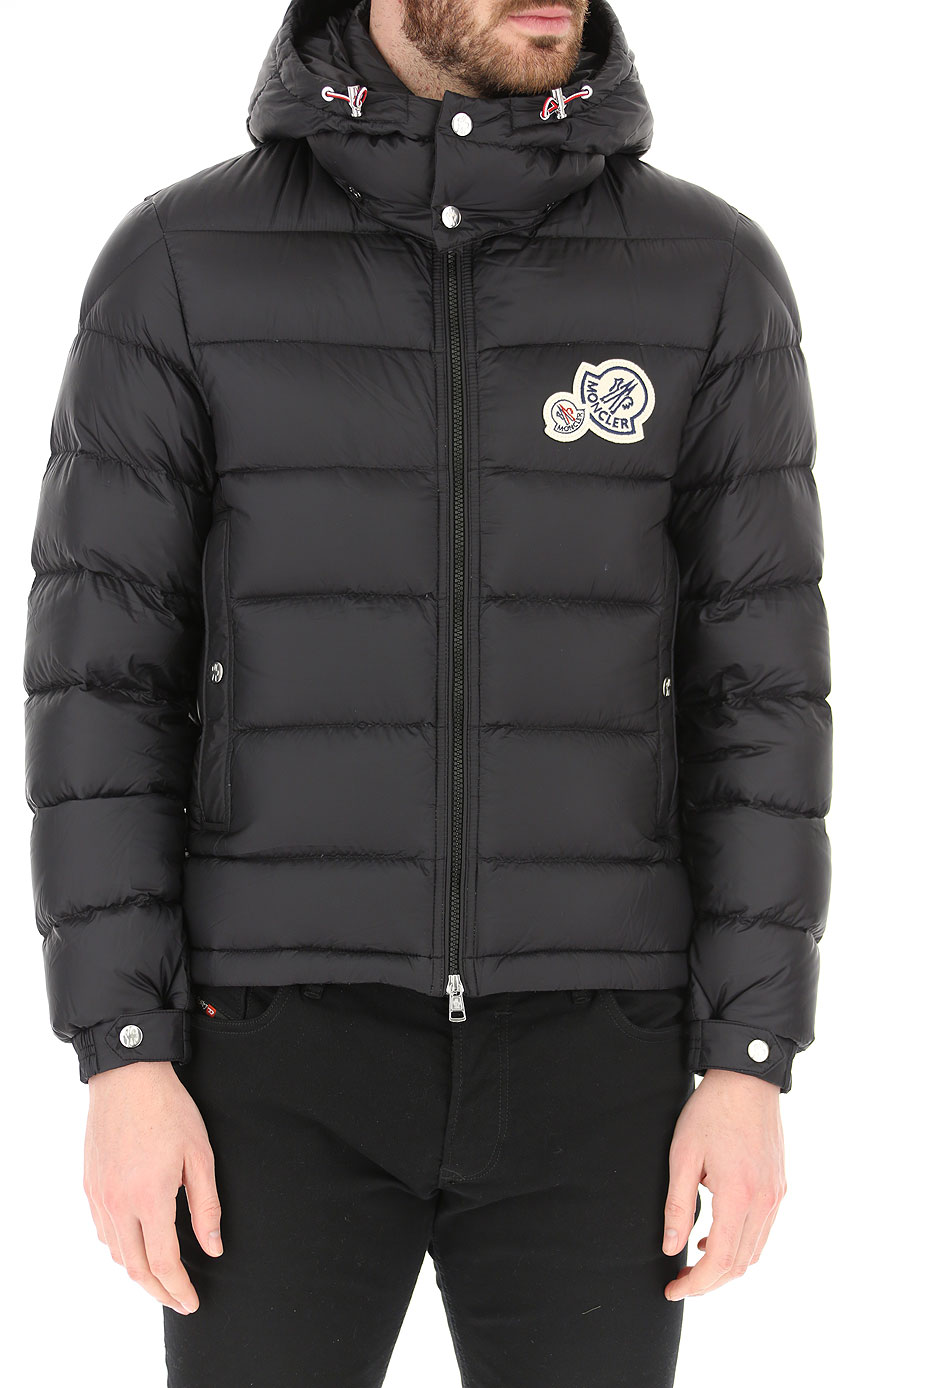 Mens Clothing Moncler, Style code: 418114953334-999-bramant